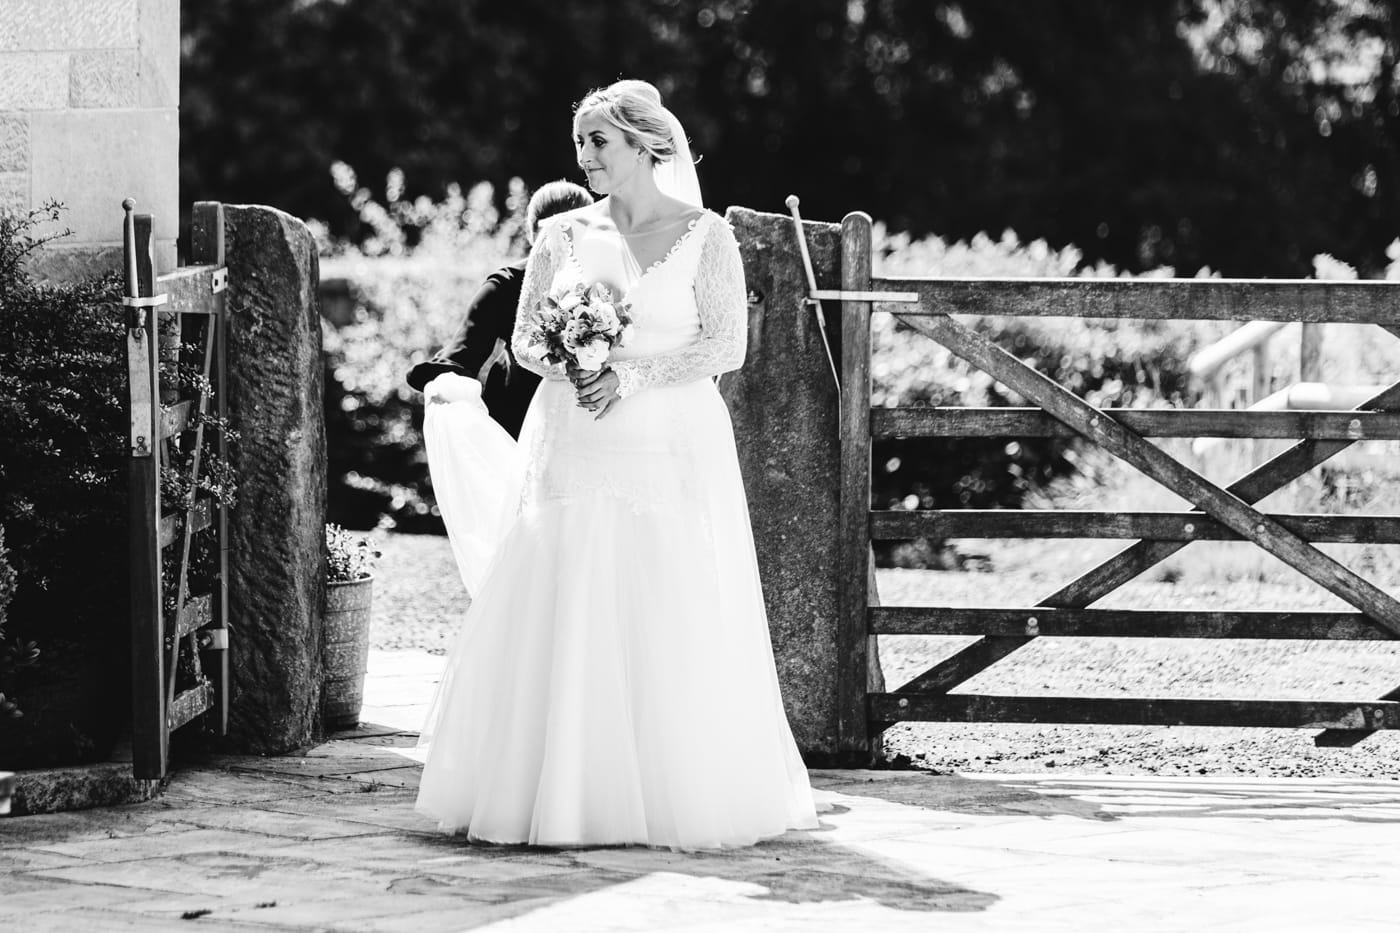 an outdoor ceremony with the bride walking down the aisle to get married at heaton house farm